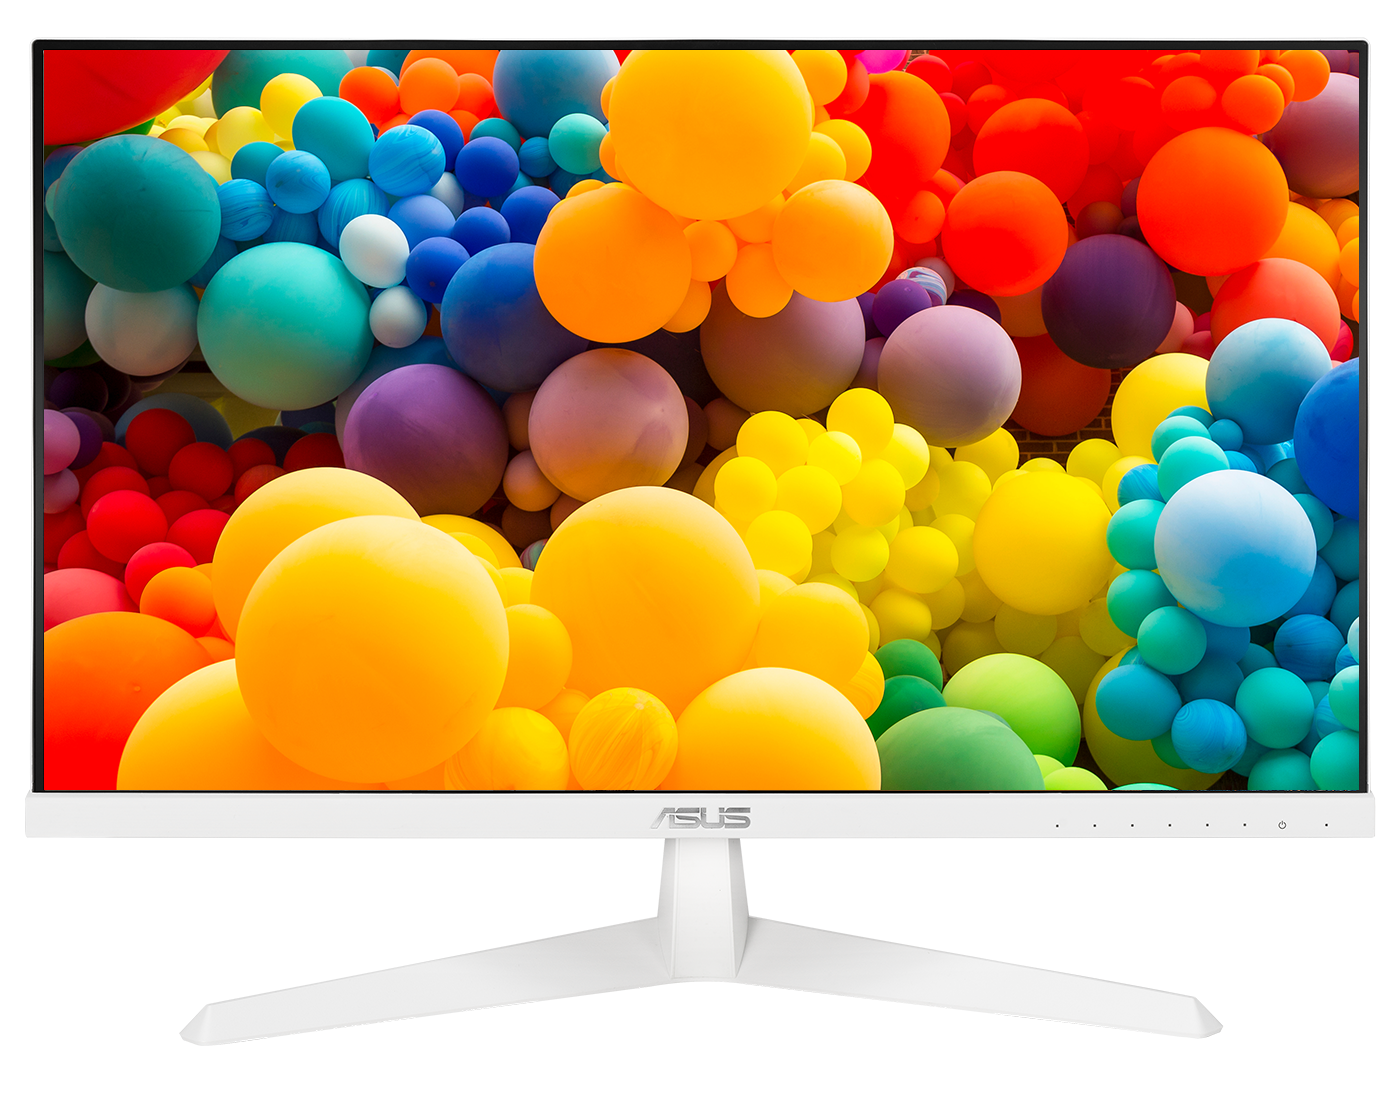 Amazing colors with IPS panel technology